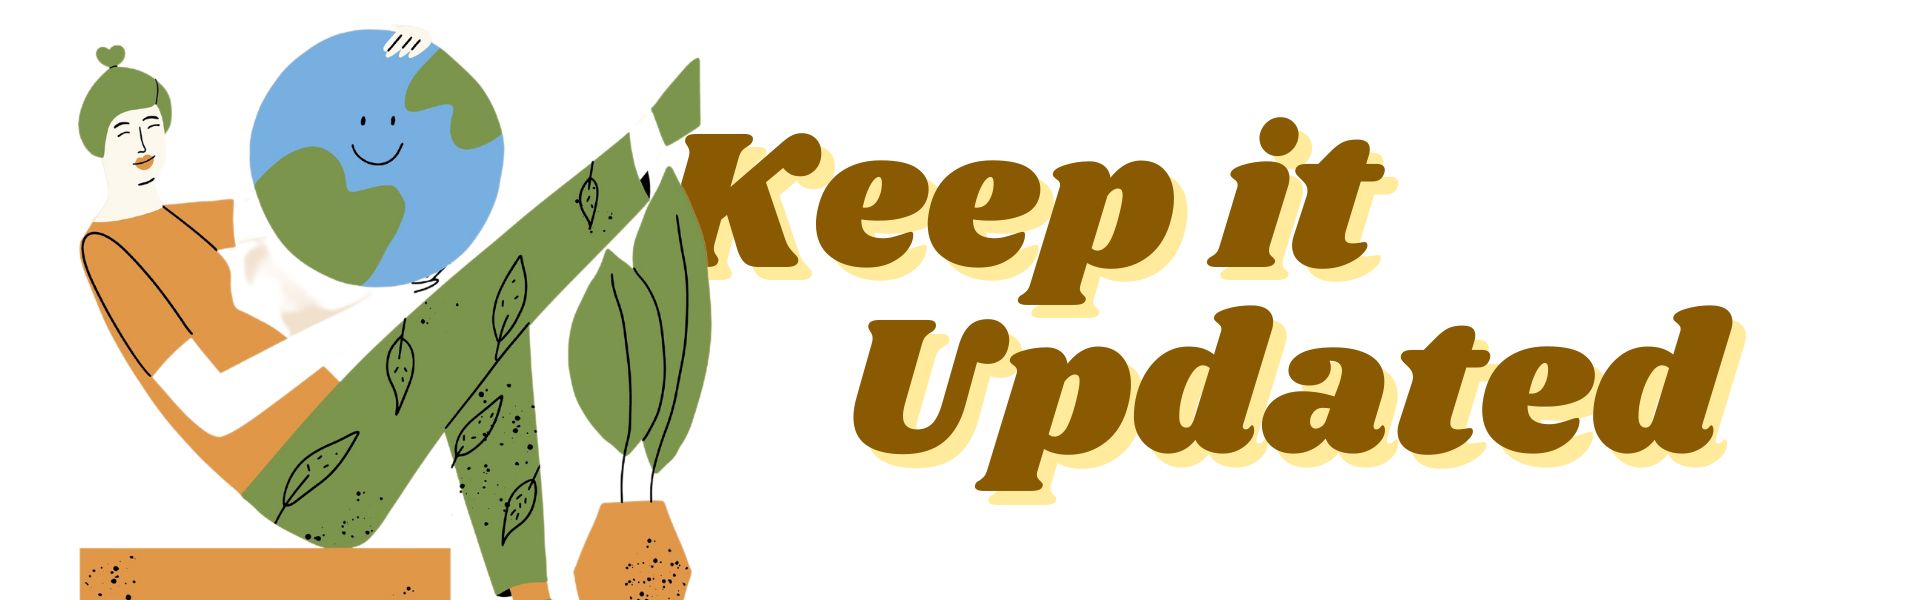 An illustrated banner featuring a person in an orange outfit with a green beanie, gently cradling a smiling blue Earth. To the right, there's the phrase "Keep it Updated" in bold golden letters. Adjacent to the text is a tall green plant with dark green leaves in an orange pot, signifying growth and care.